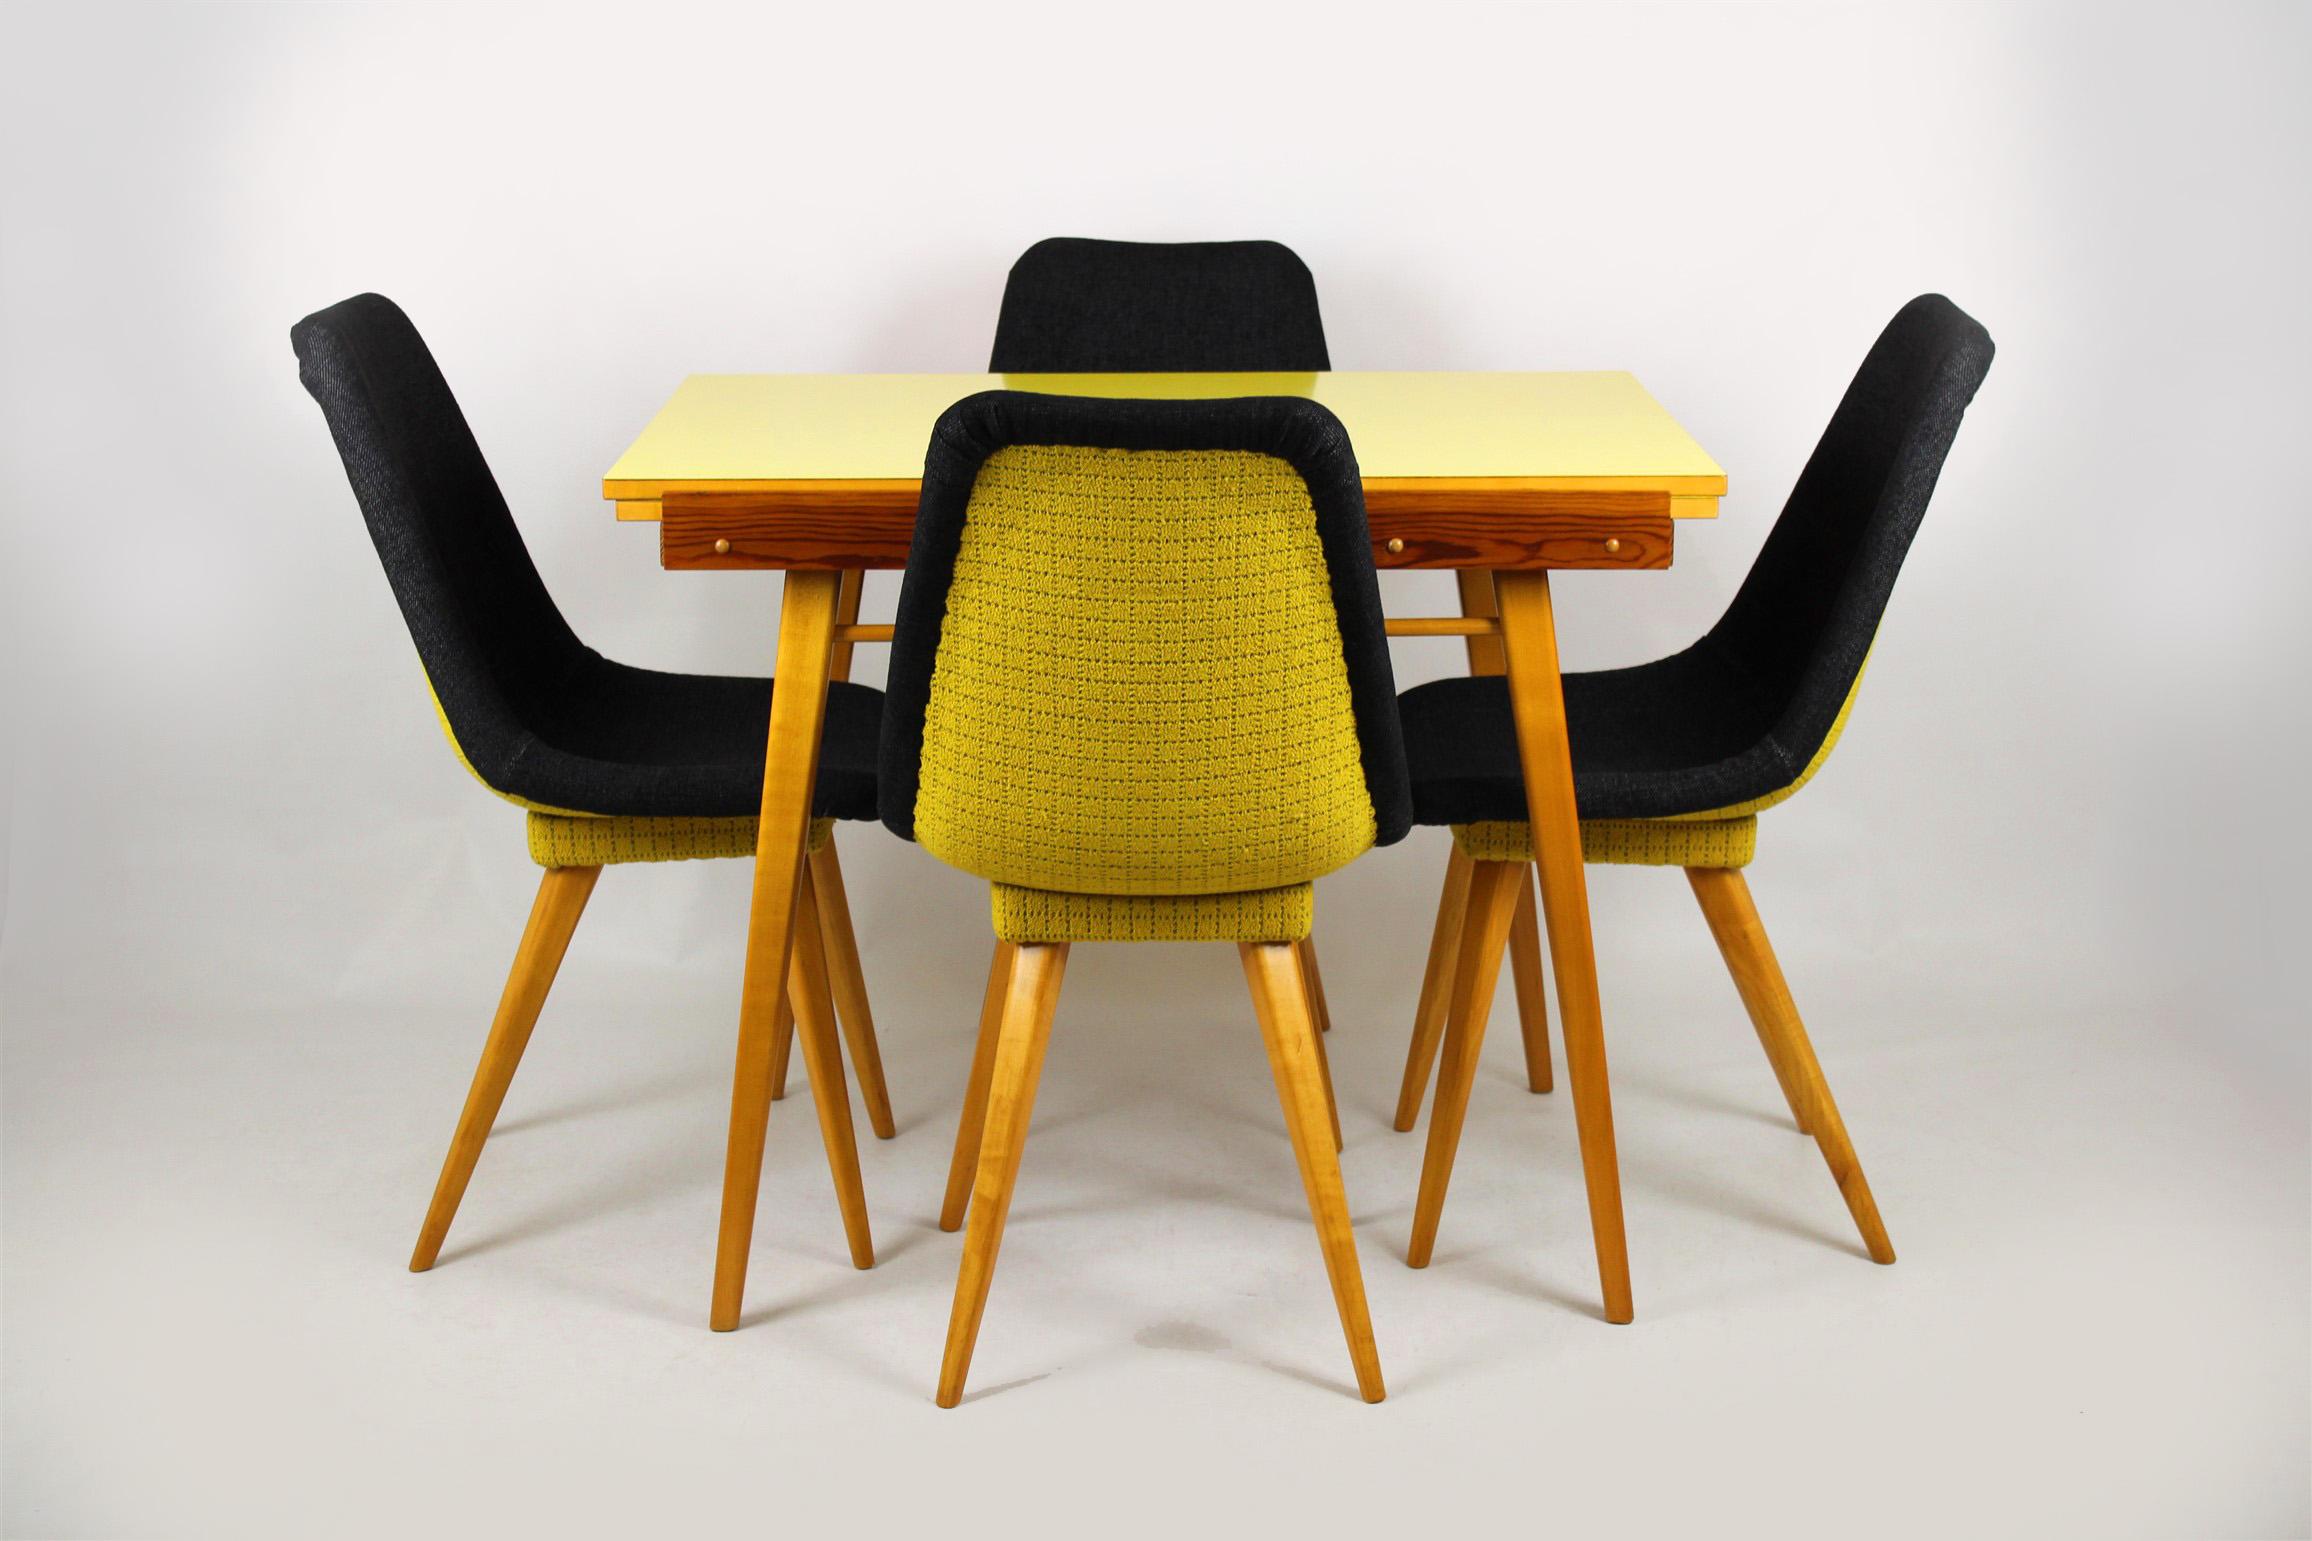 Czech Midcentury Chairs in Grey & Yellow from Drevovyroba Ostrava, 1960s, Set of 4 For Sale